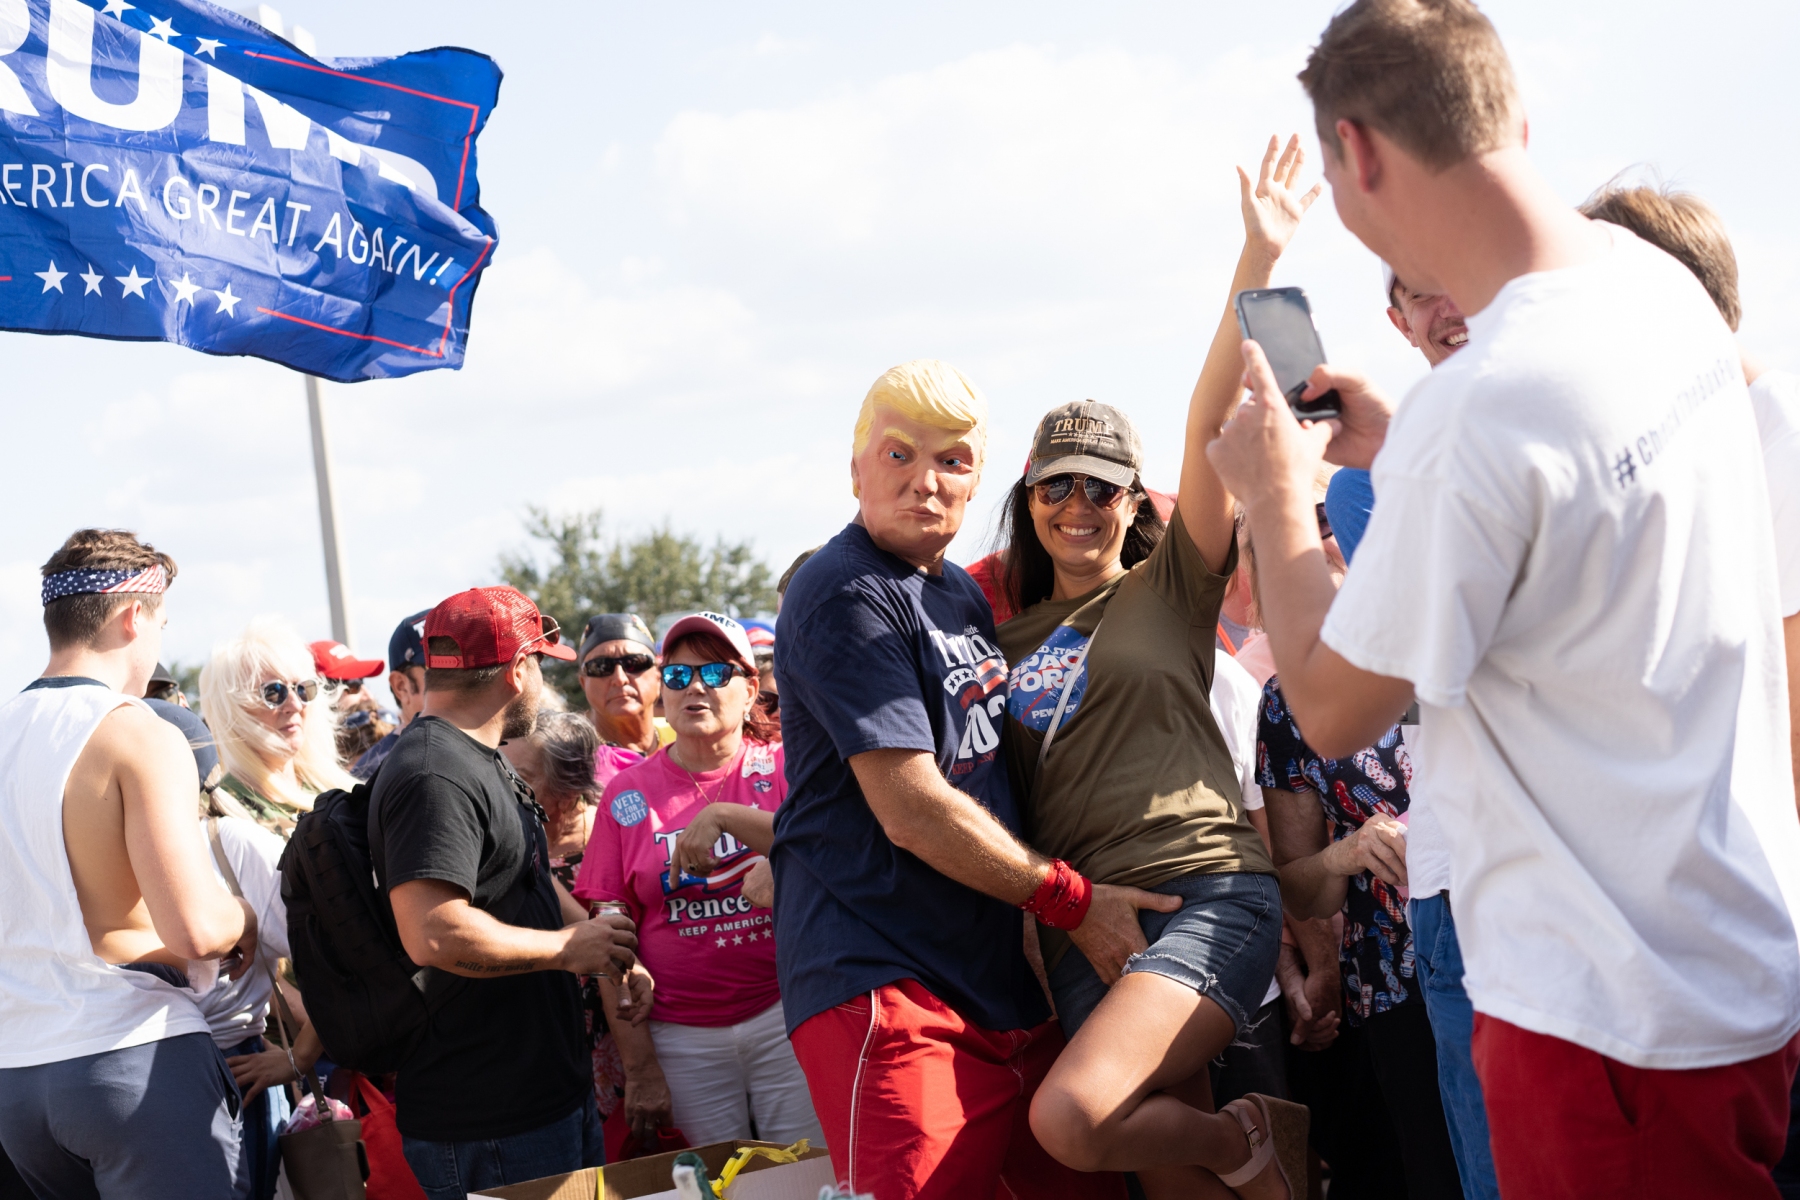 While waiting in line to enter President Trump's rally, Lee Stein grabs his significant other, Ashley Stein while a nearby supporter snaps a photo of them on October 31, 2018, at Estero, Fla